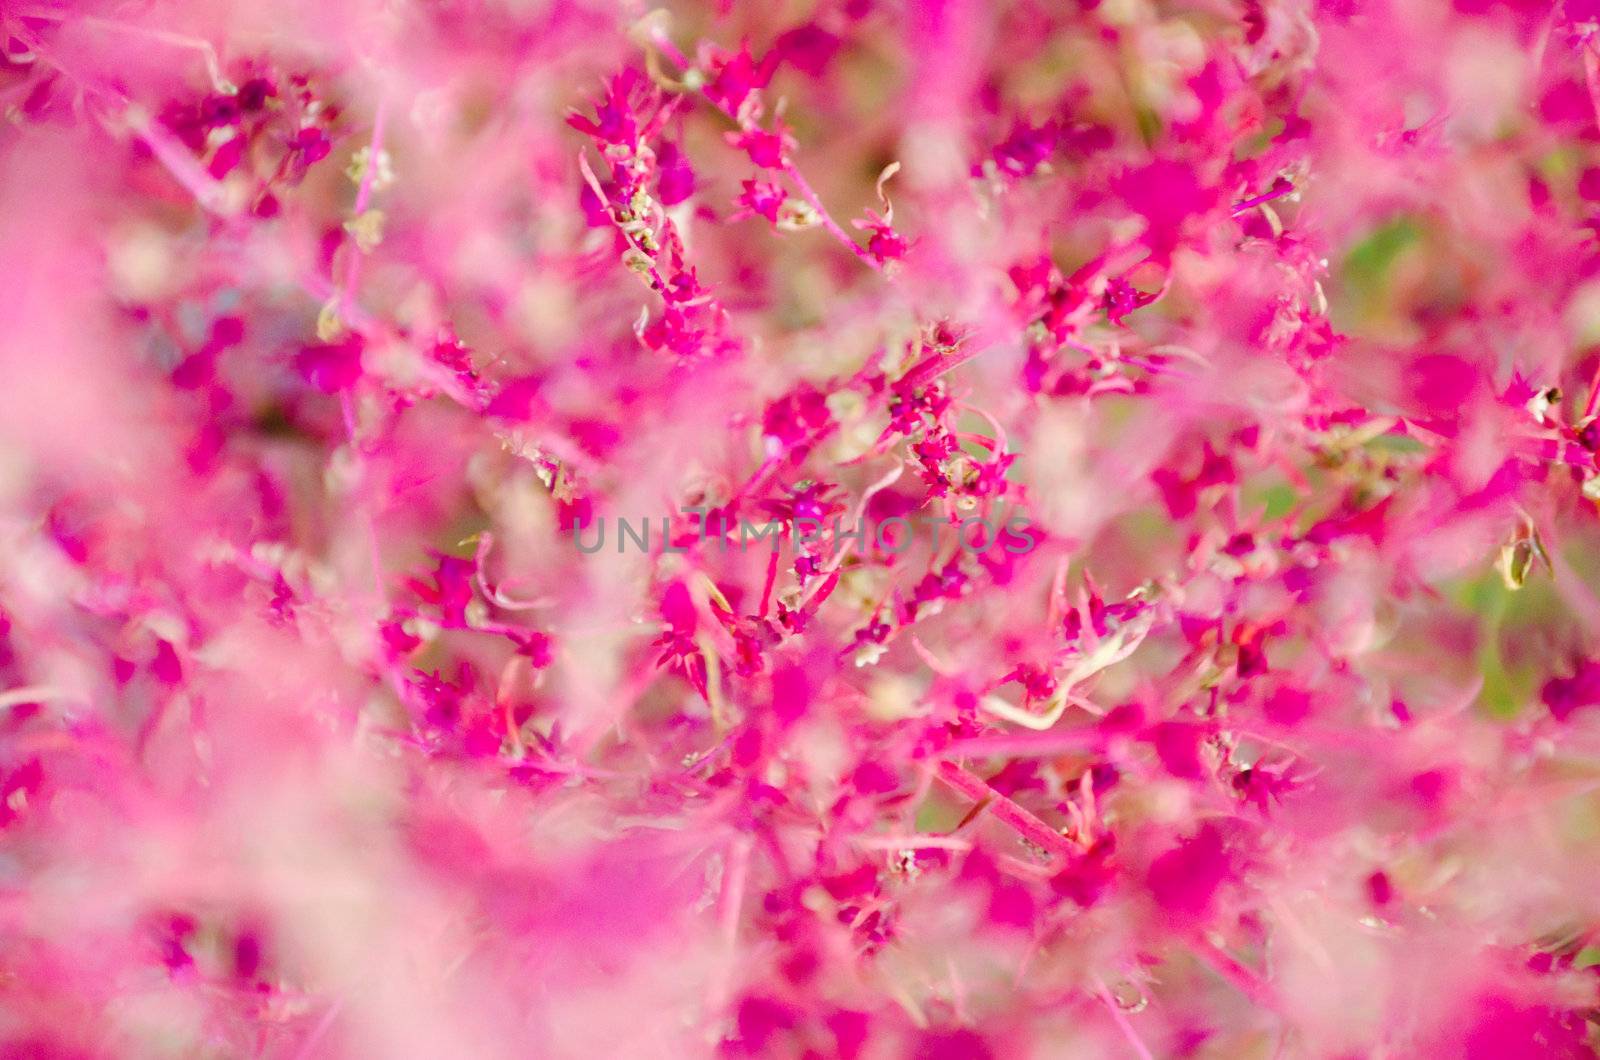 blurred floral background by Sergieiev